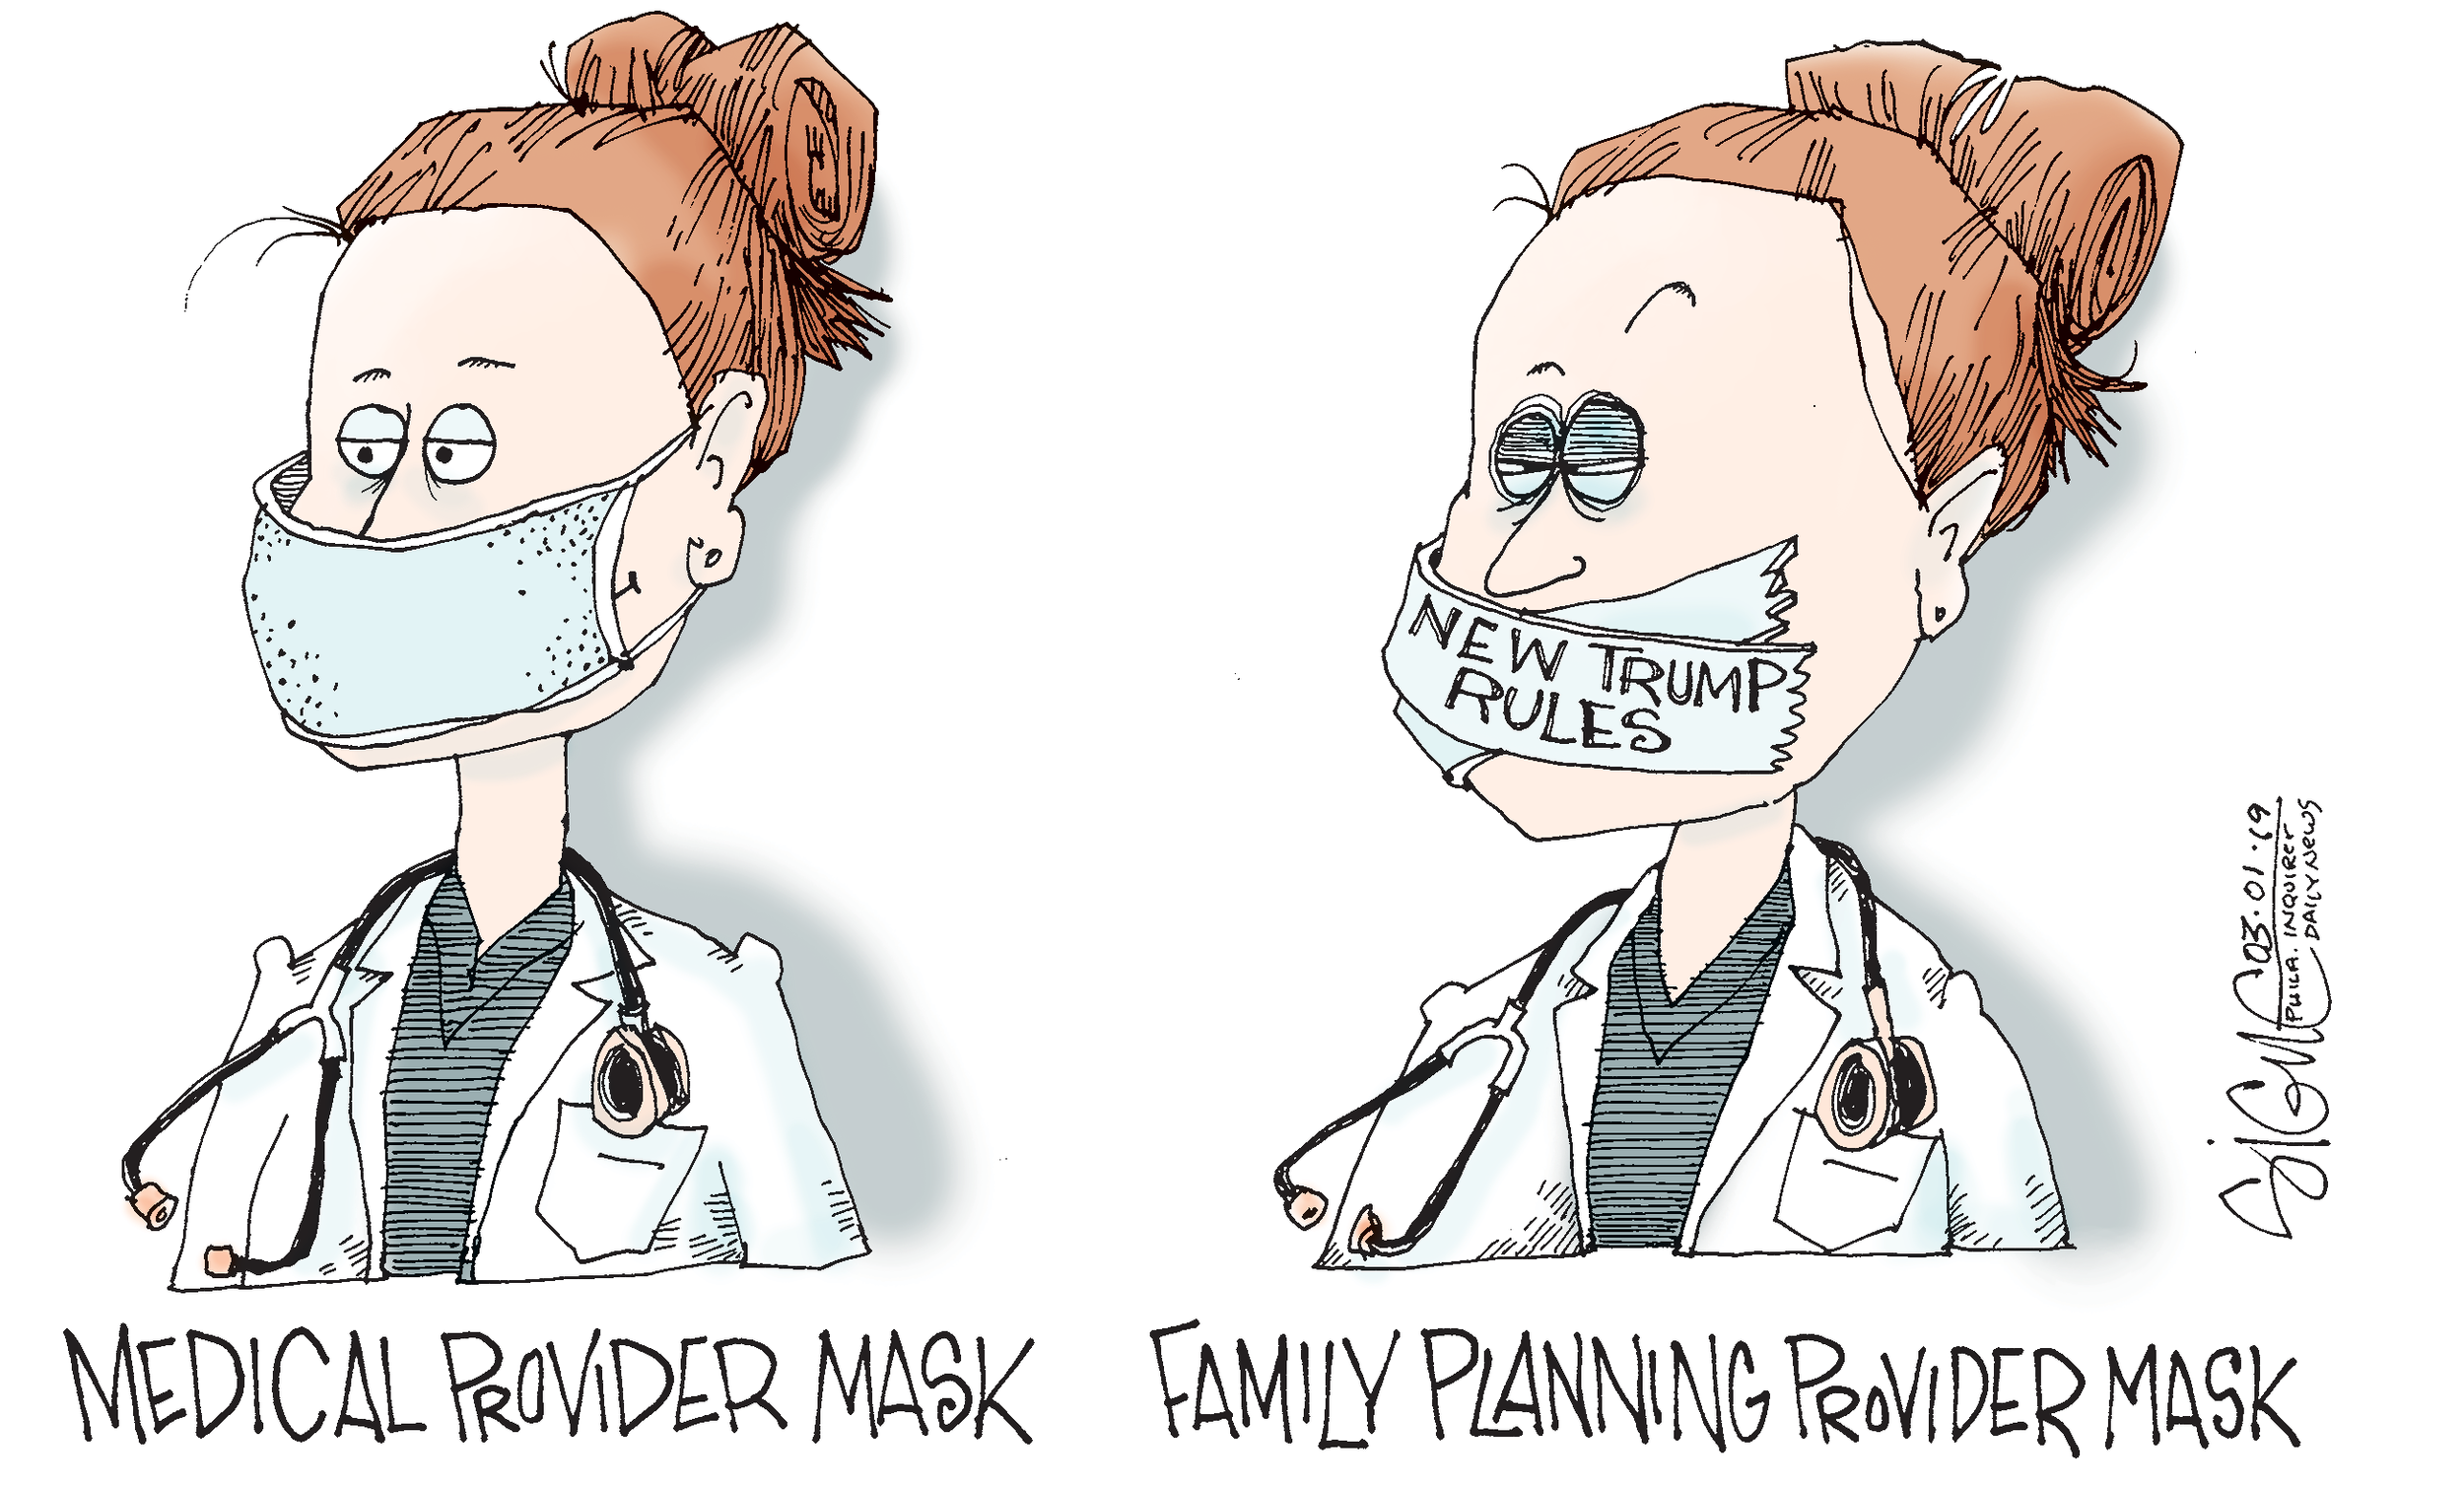 03-01-19 Abortion Mask.png